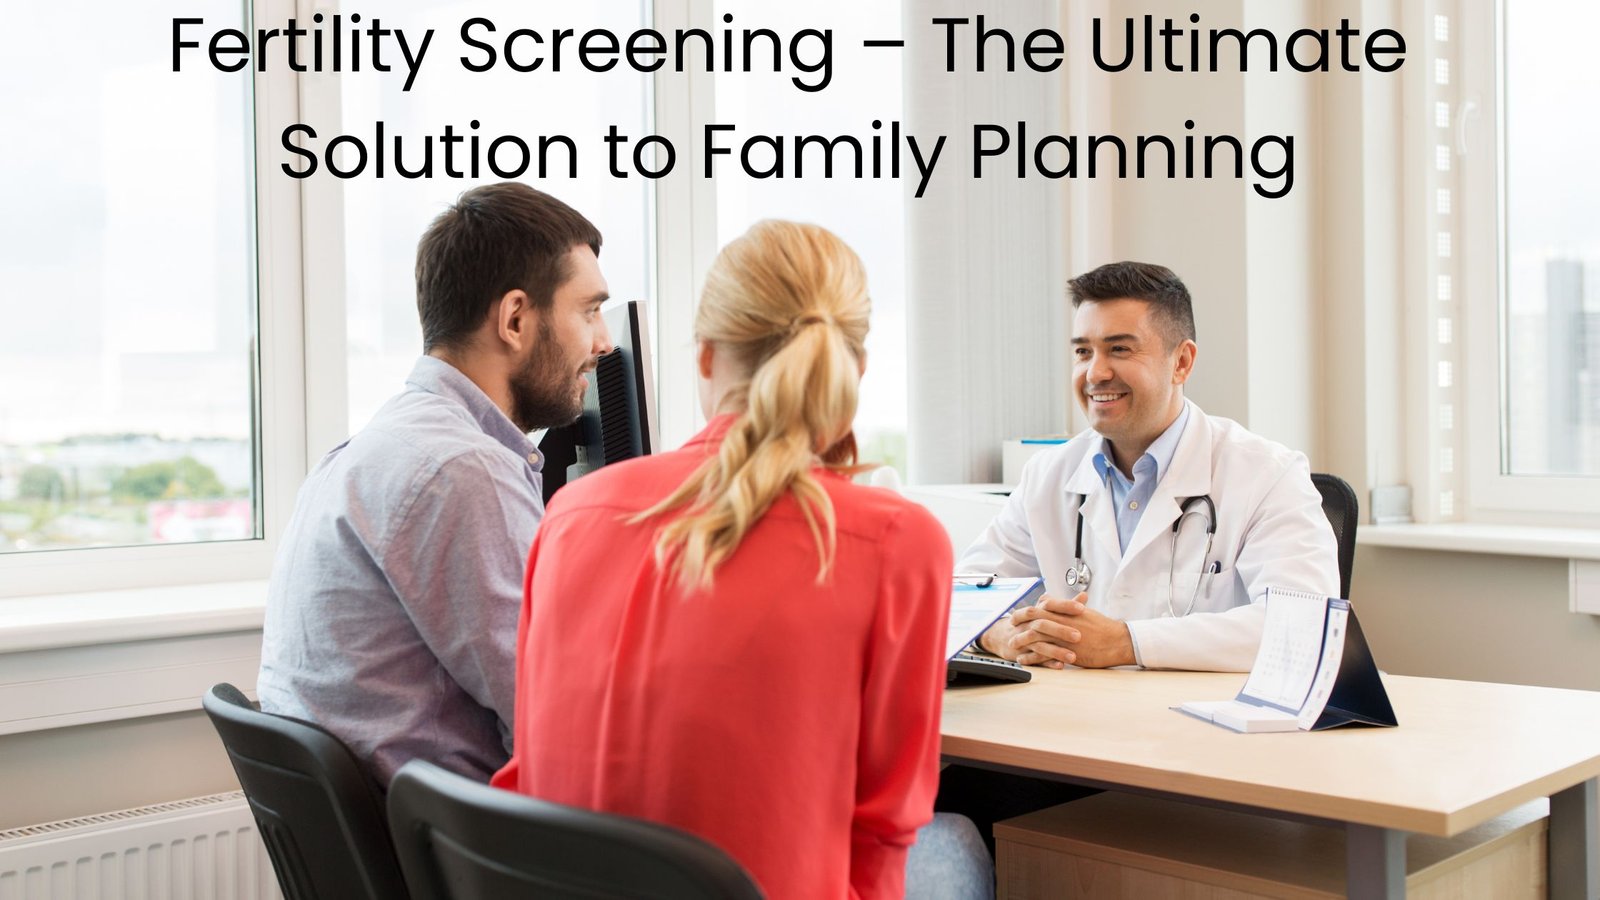 Fertility Screening – The Ultimate Solution to Family Planning